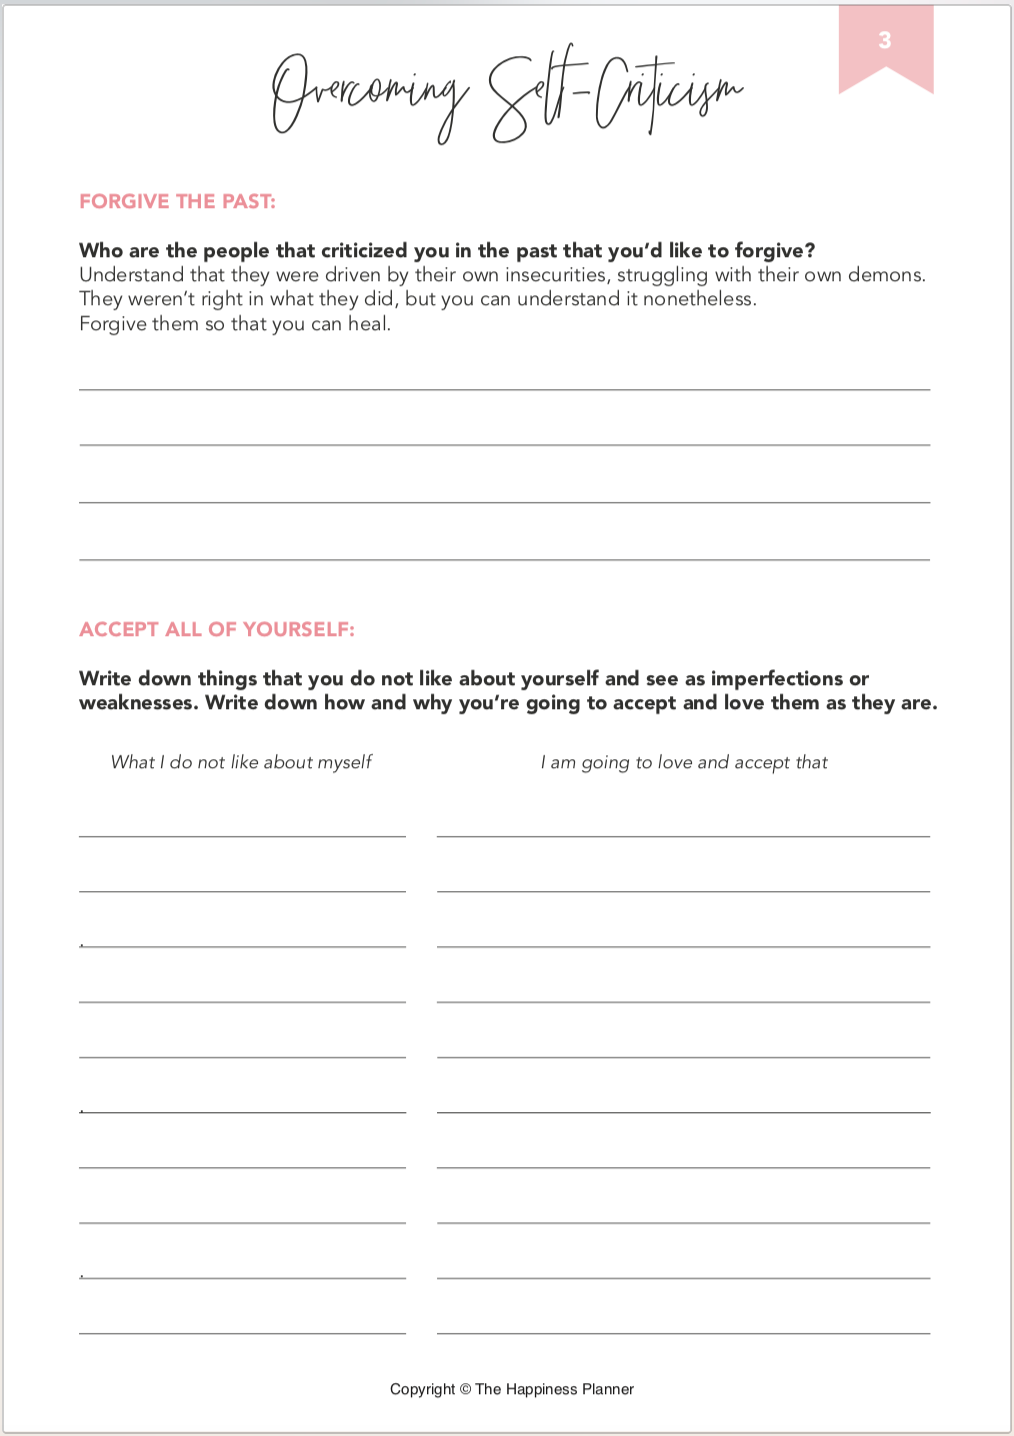 Printables: #SelfLove - The Happiness Planner®